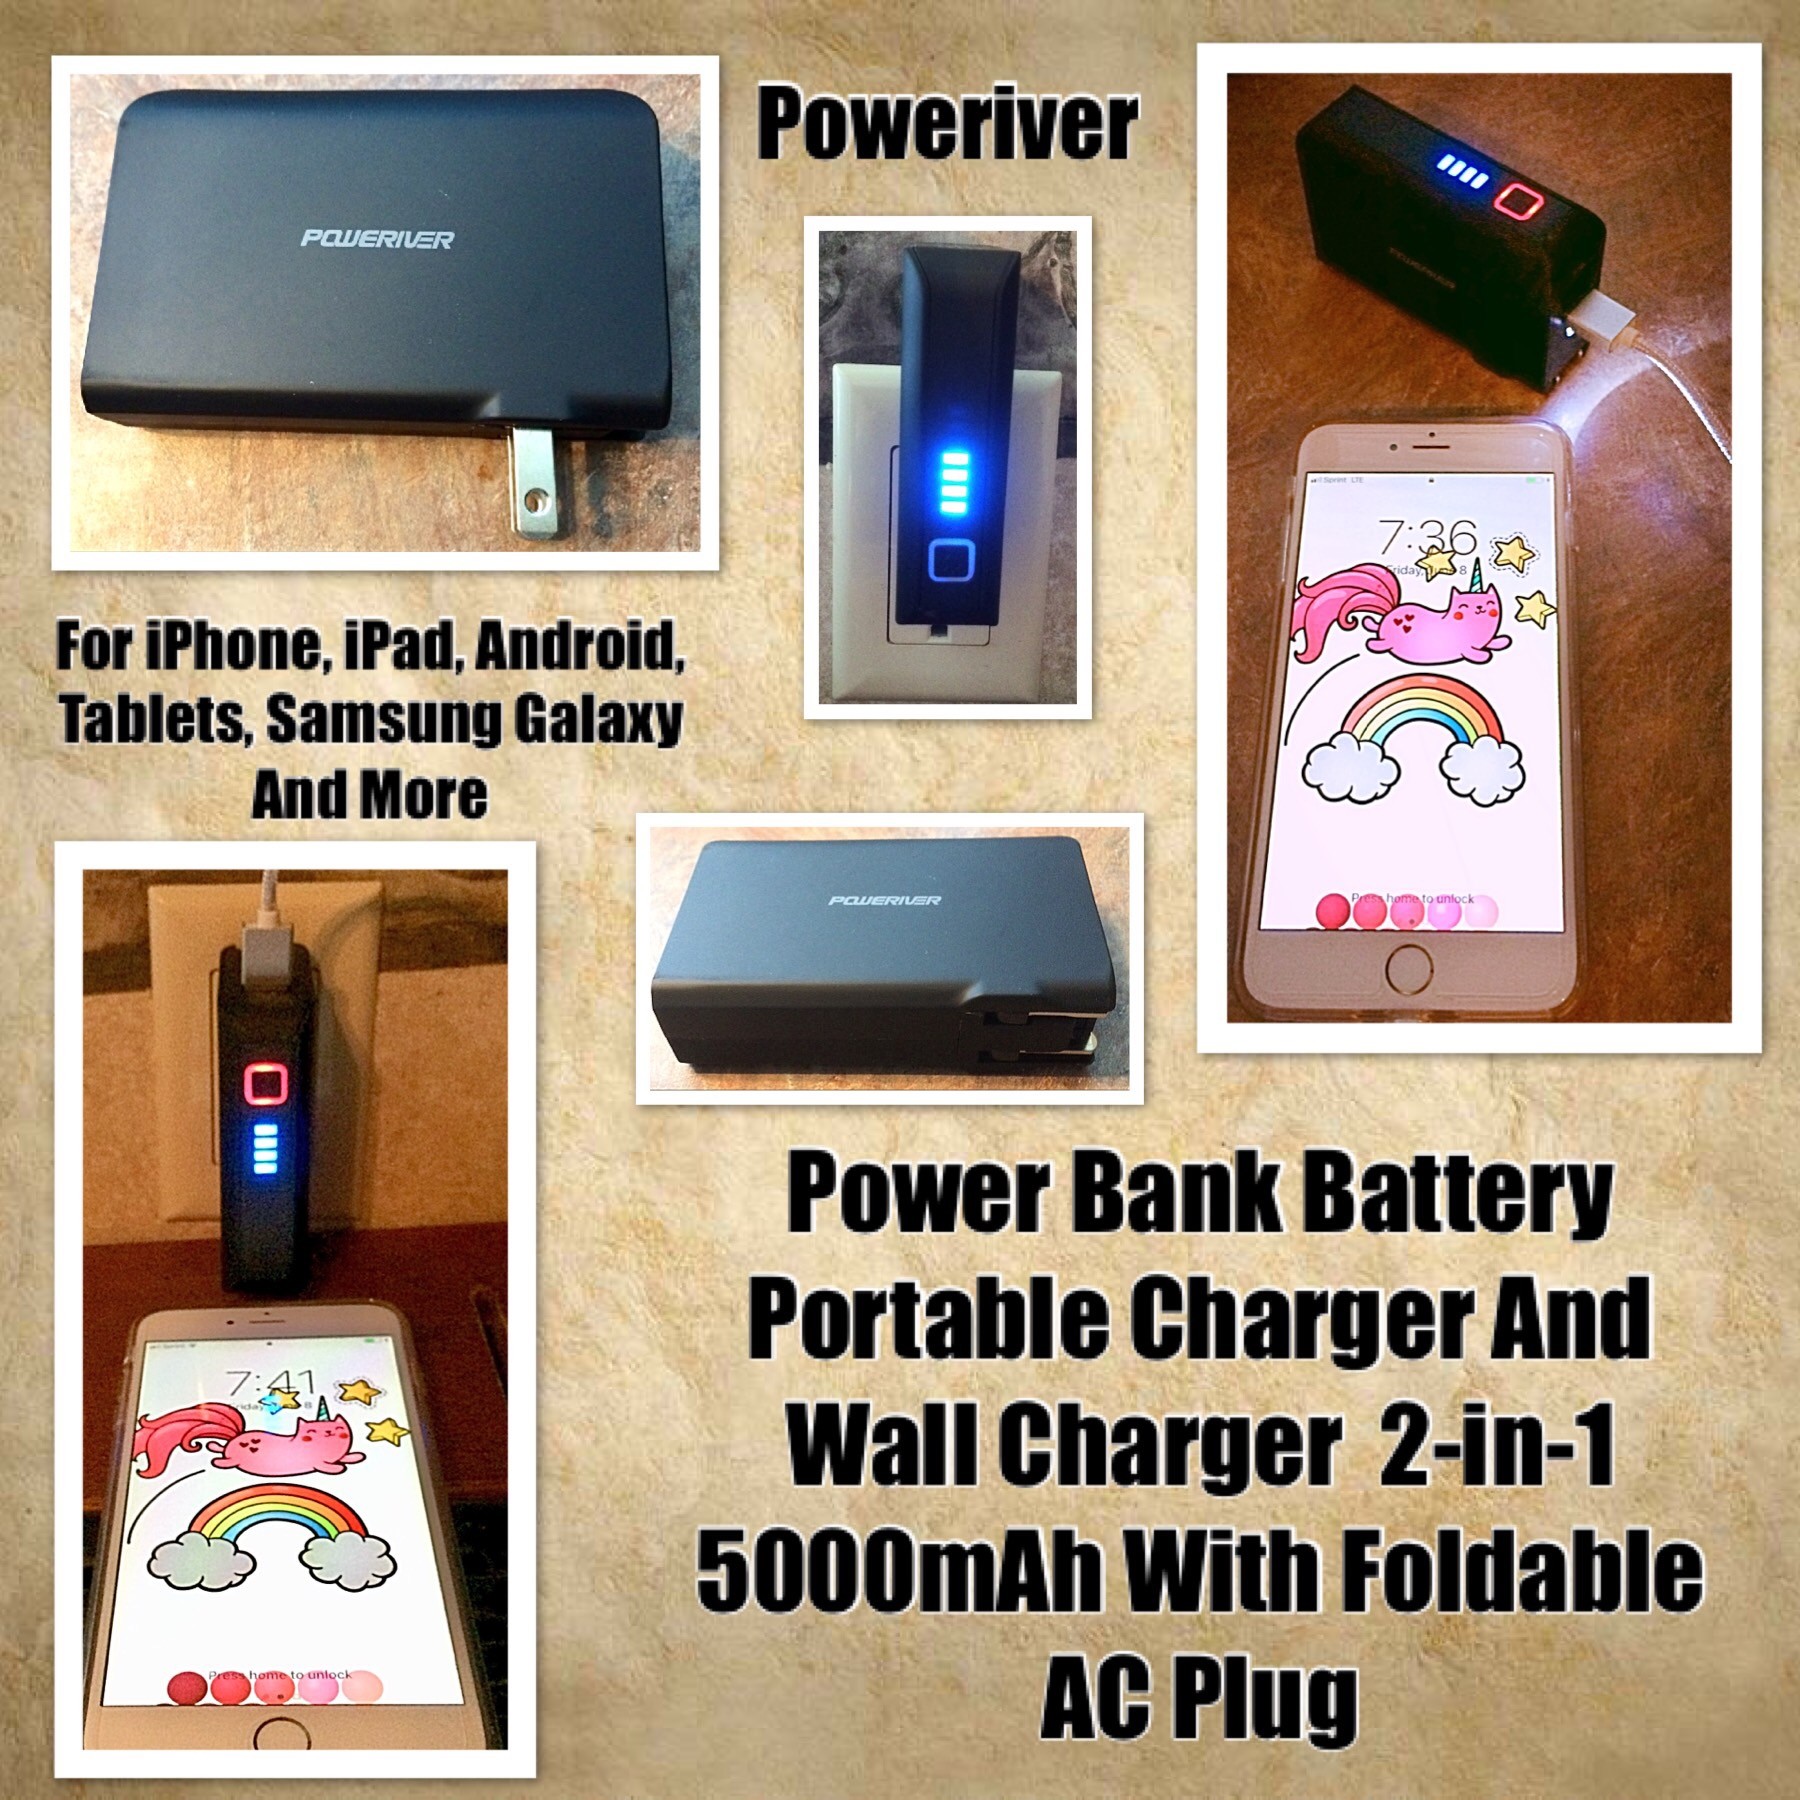 POWERIVER Power Bank Portable Charger And Wall Charger, Poweriver 2-in-1 5000mAh With Foldable AC Plug For iPhone, iPad, Android, Tablets, Samsung Galaxy And More (Black)